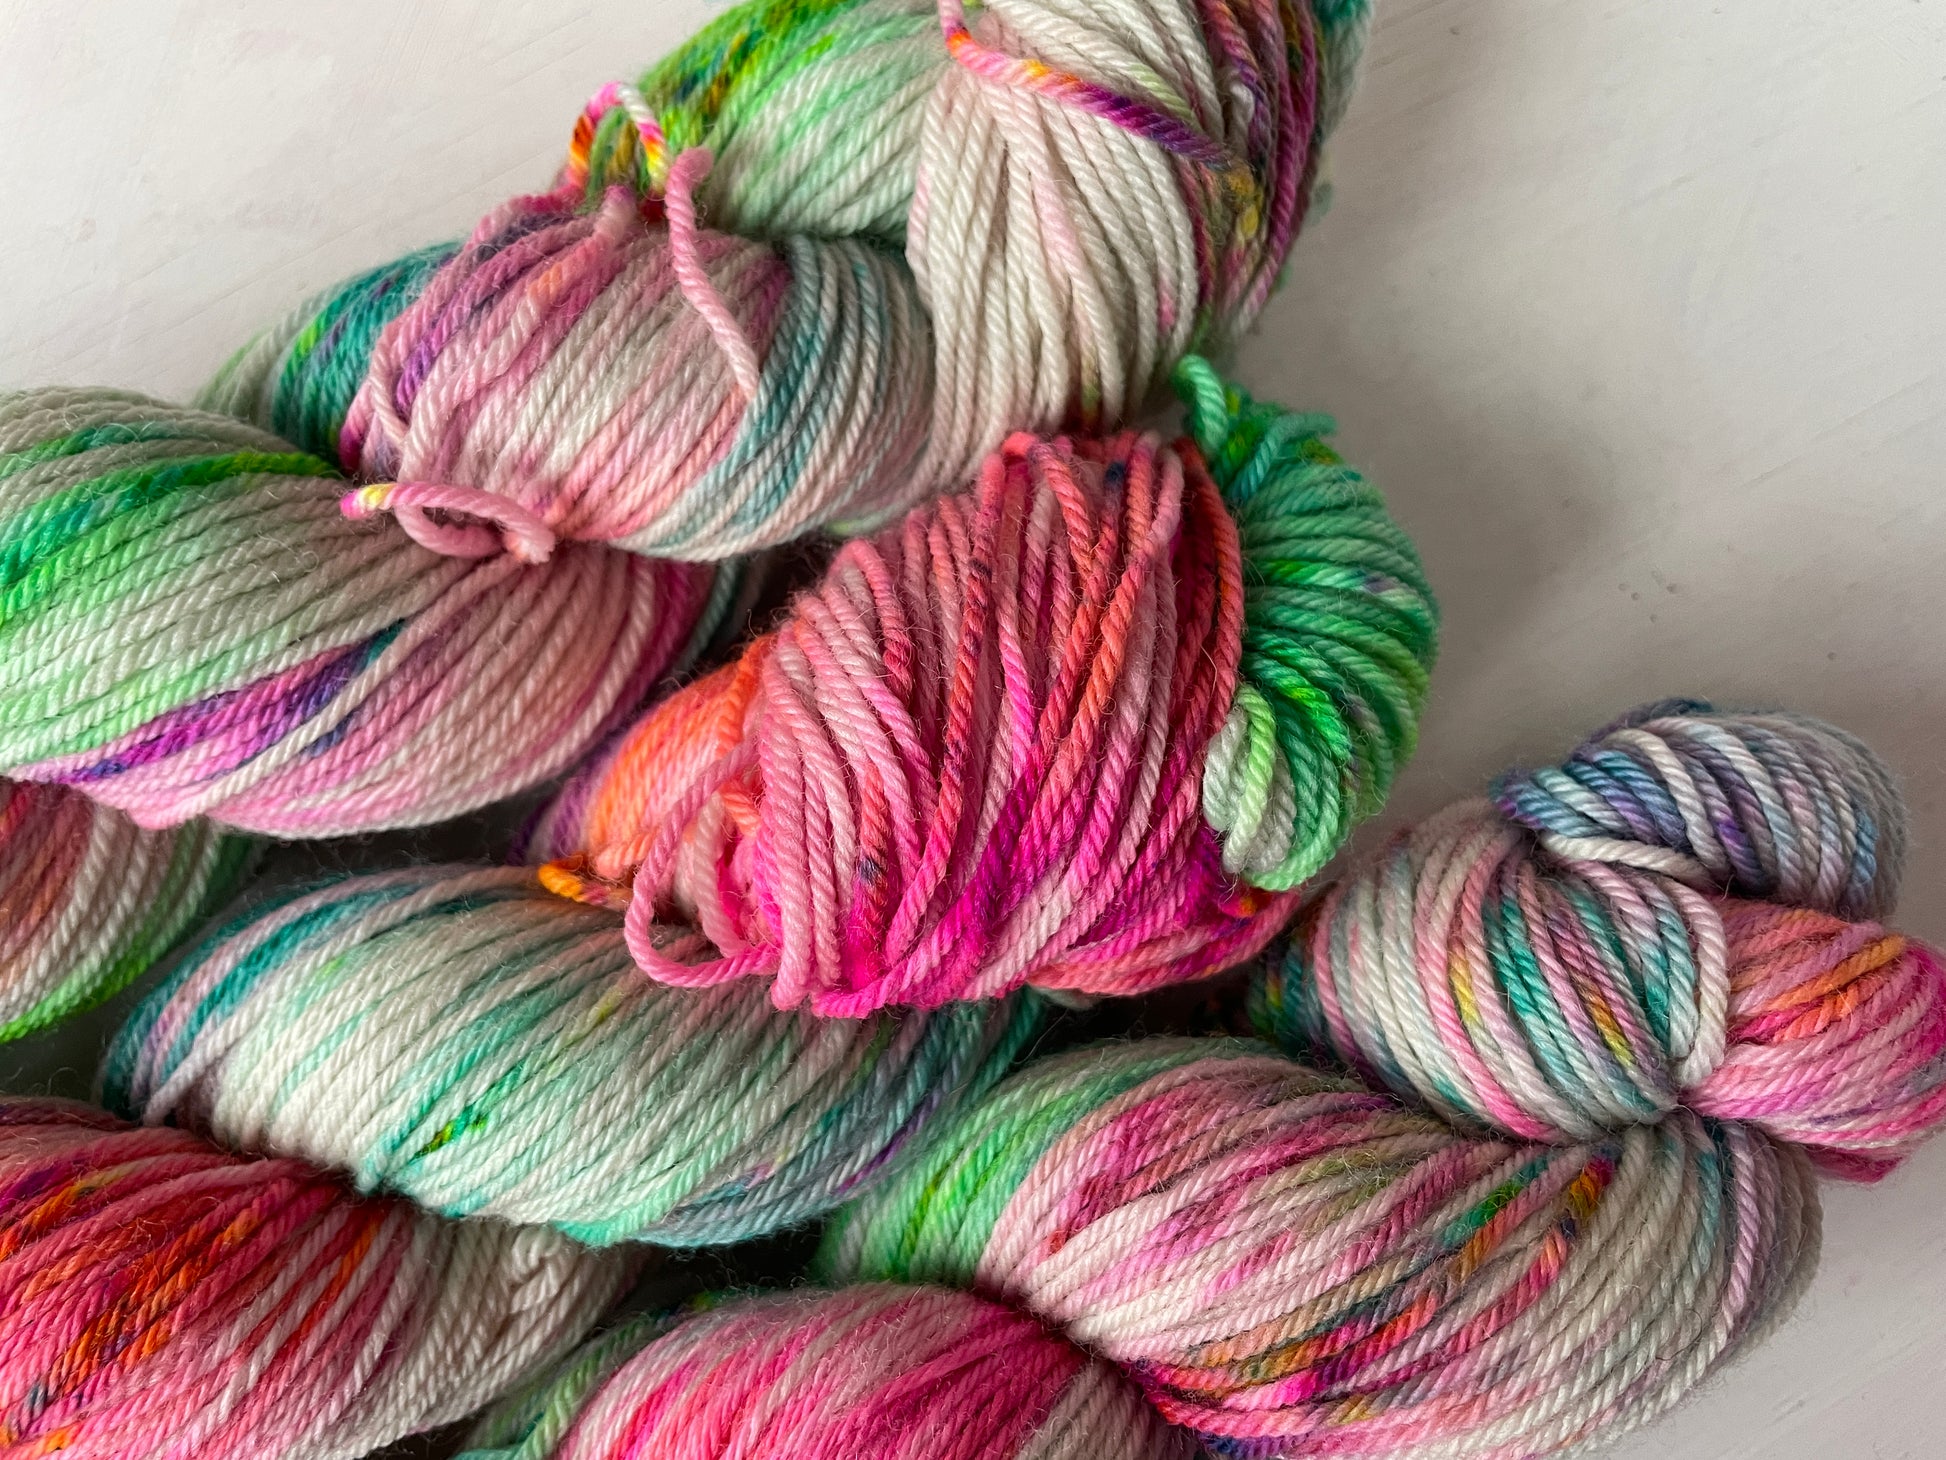 OOAK Heavy Handed Iridium BFL DK Wool from the hand dyed yarn expert, The Wool Kitchen